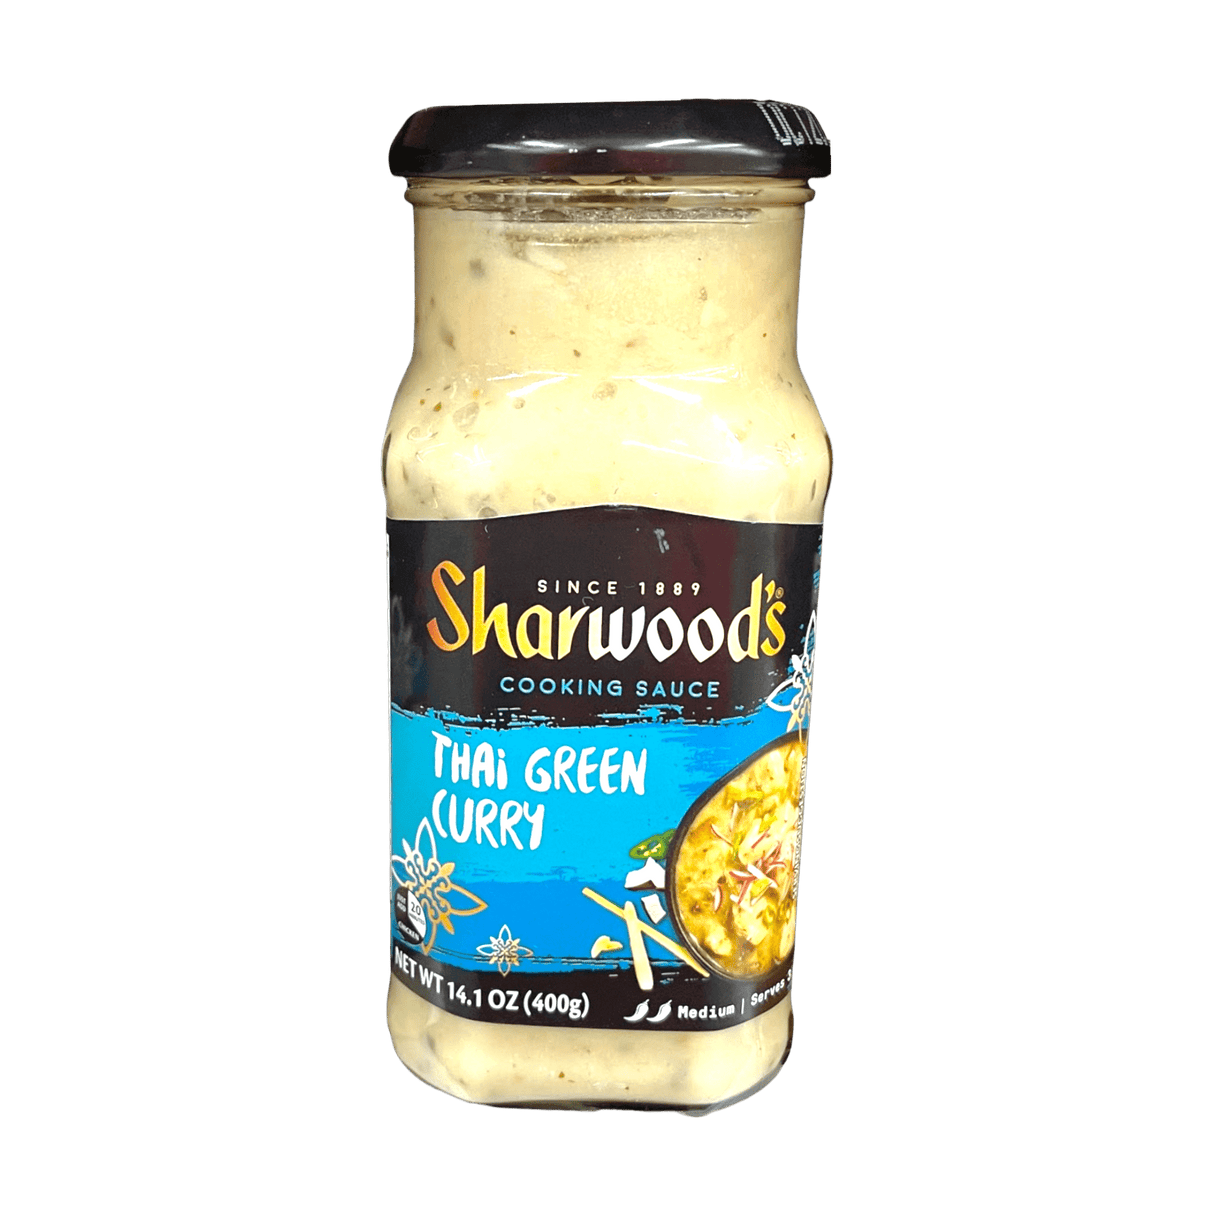 Sharwoods Thai Green Curry Cooking Sauce